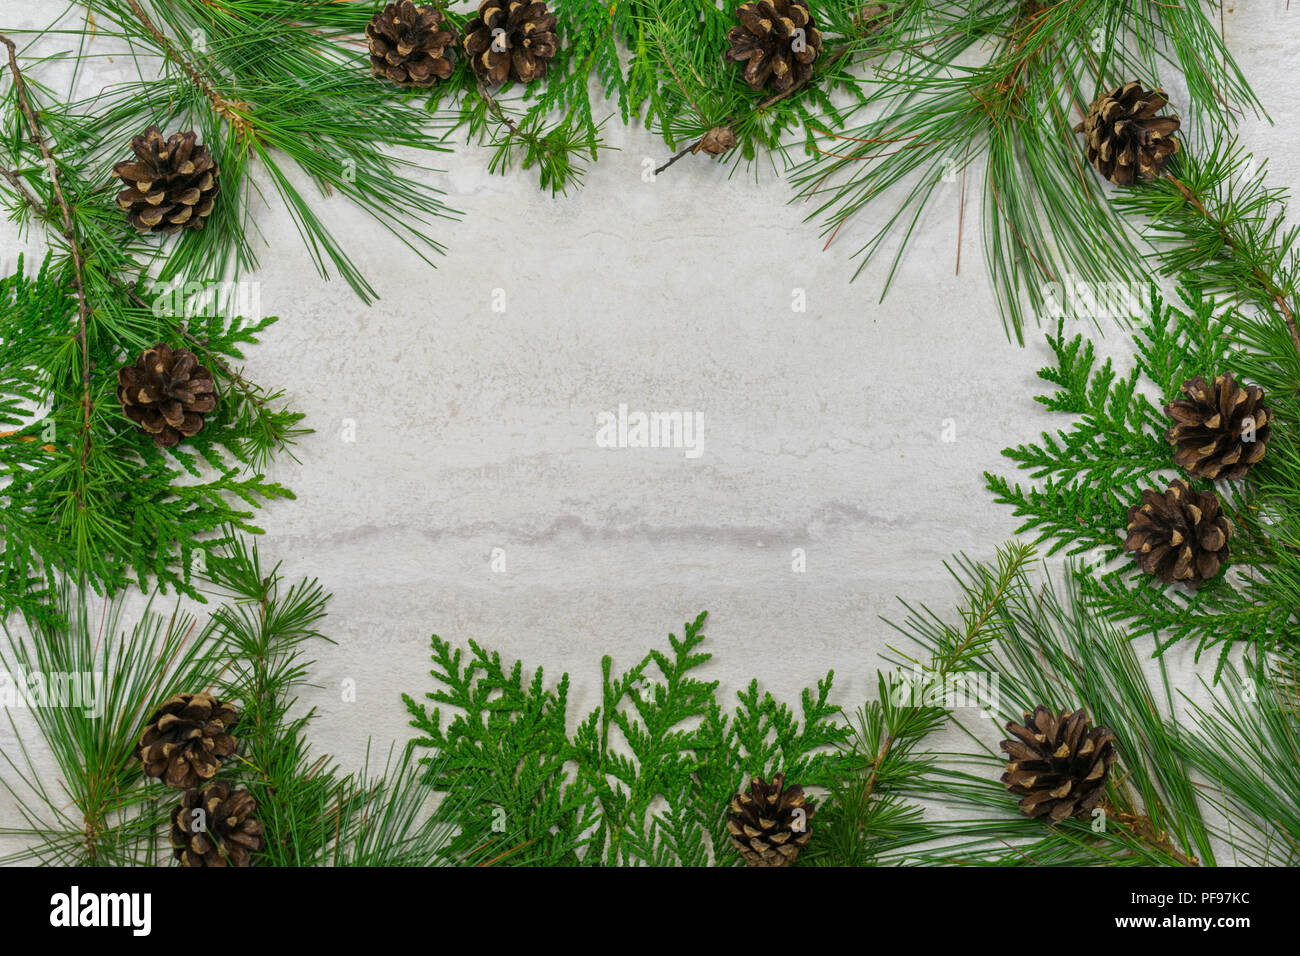 A border of cedar, white pine, and tamarack branches along with scotch pine  cones with copy space in the middle Stock Photo